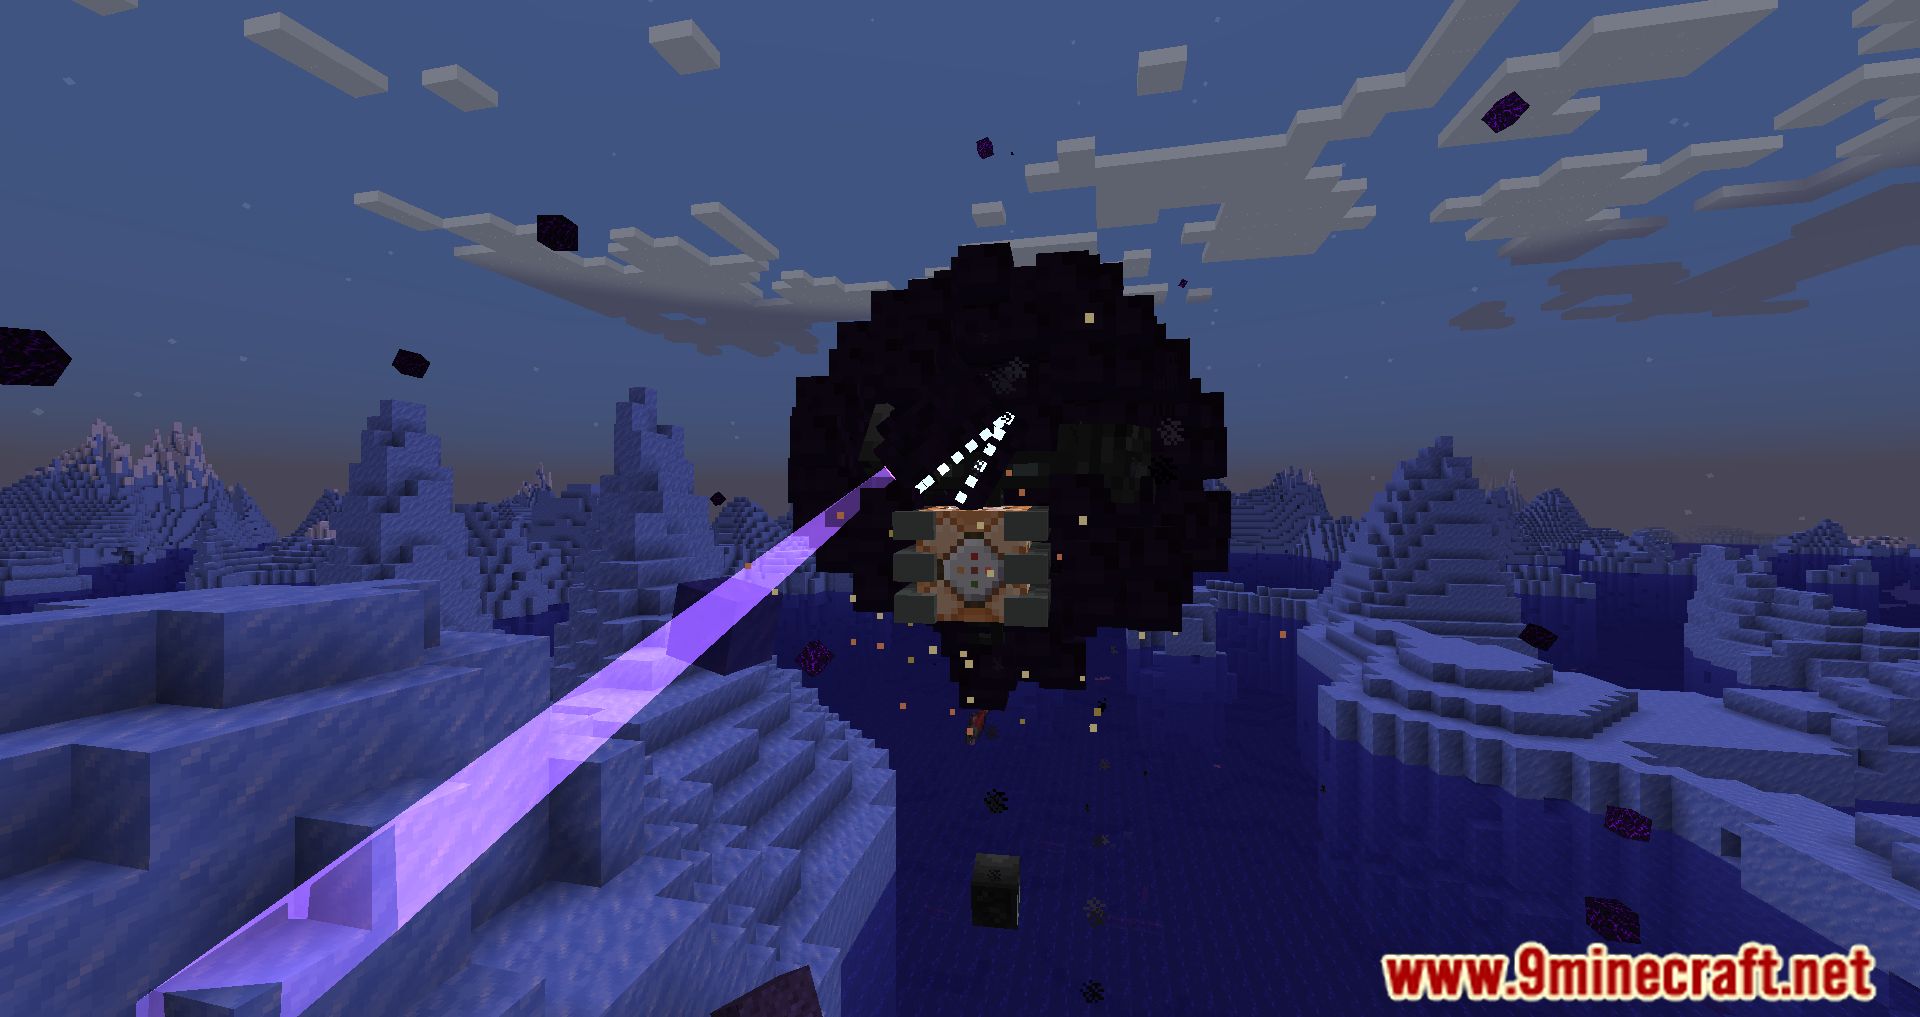 Cracker's Wither Storm Mod Introduces Three Bizarre Bosses That